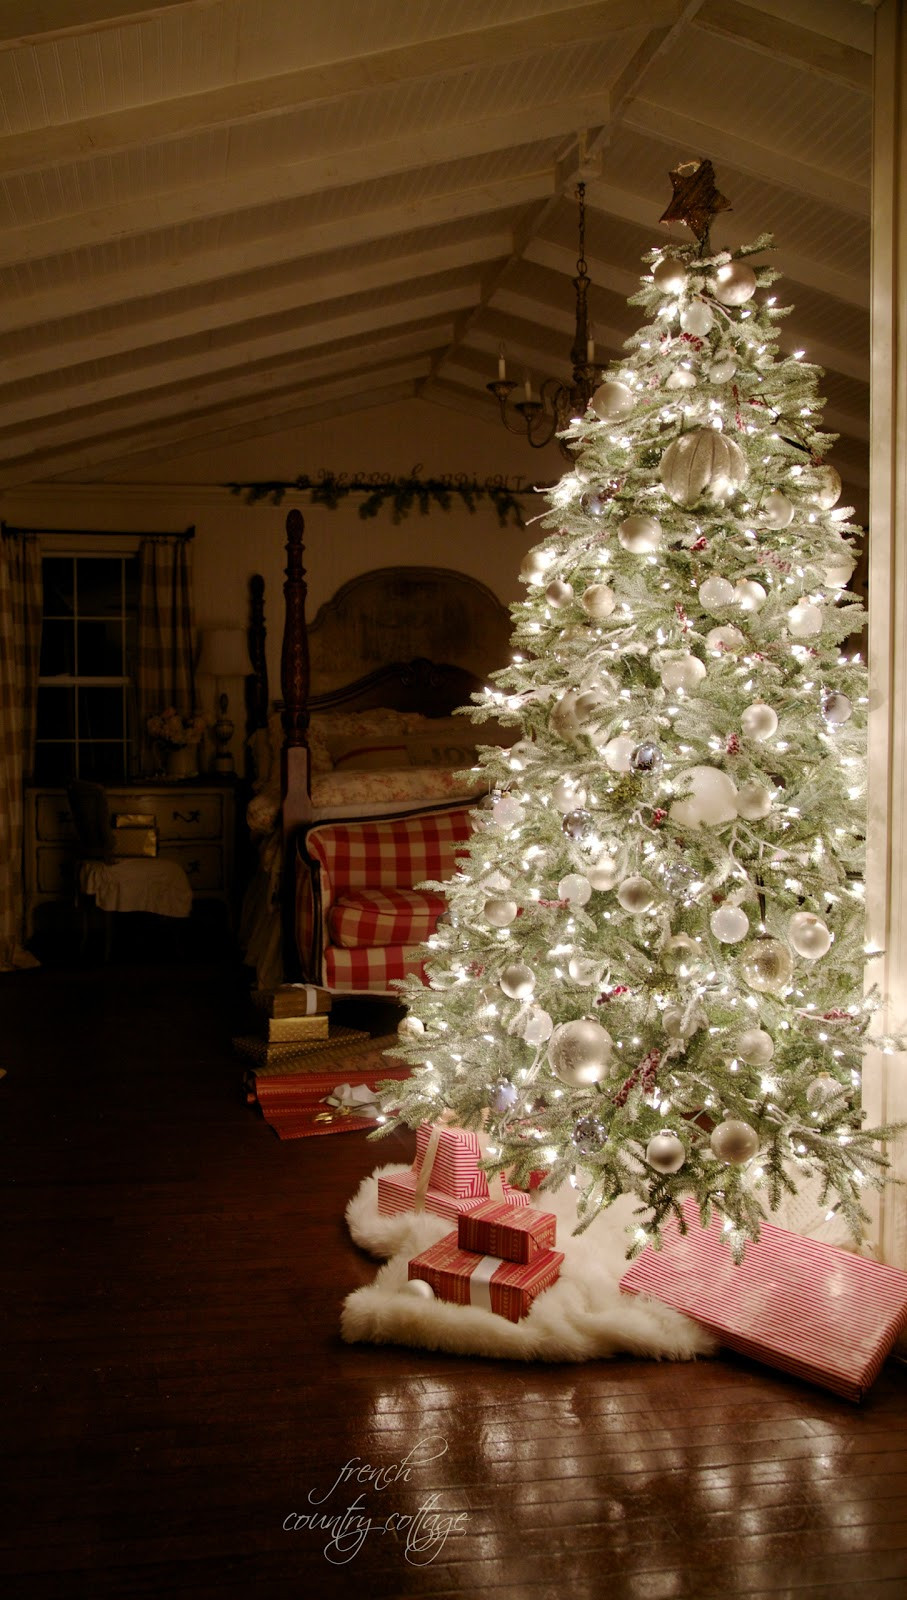 Bedroom Christmas Tree
 Merry & Bright Christmas Bedroom FRENCH COUNTRY COTTAGE